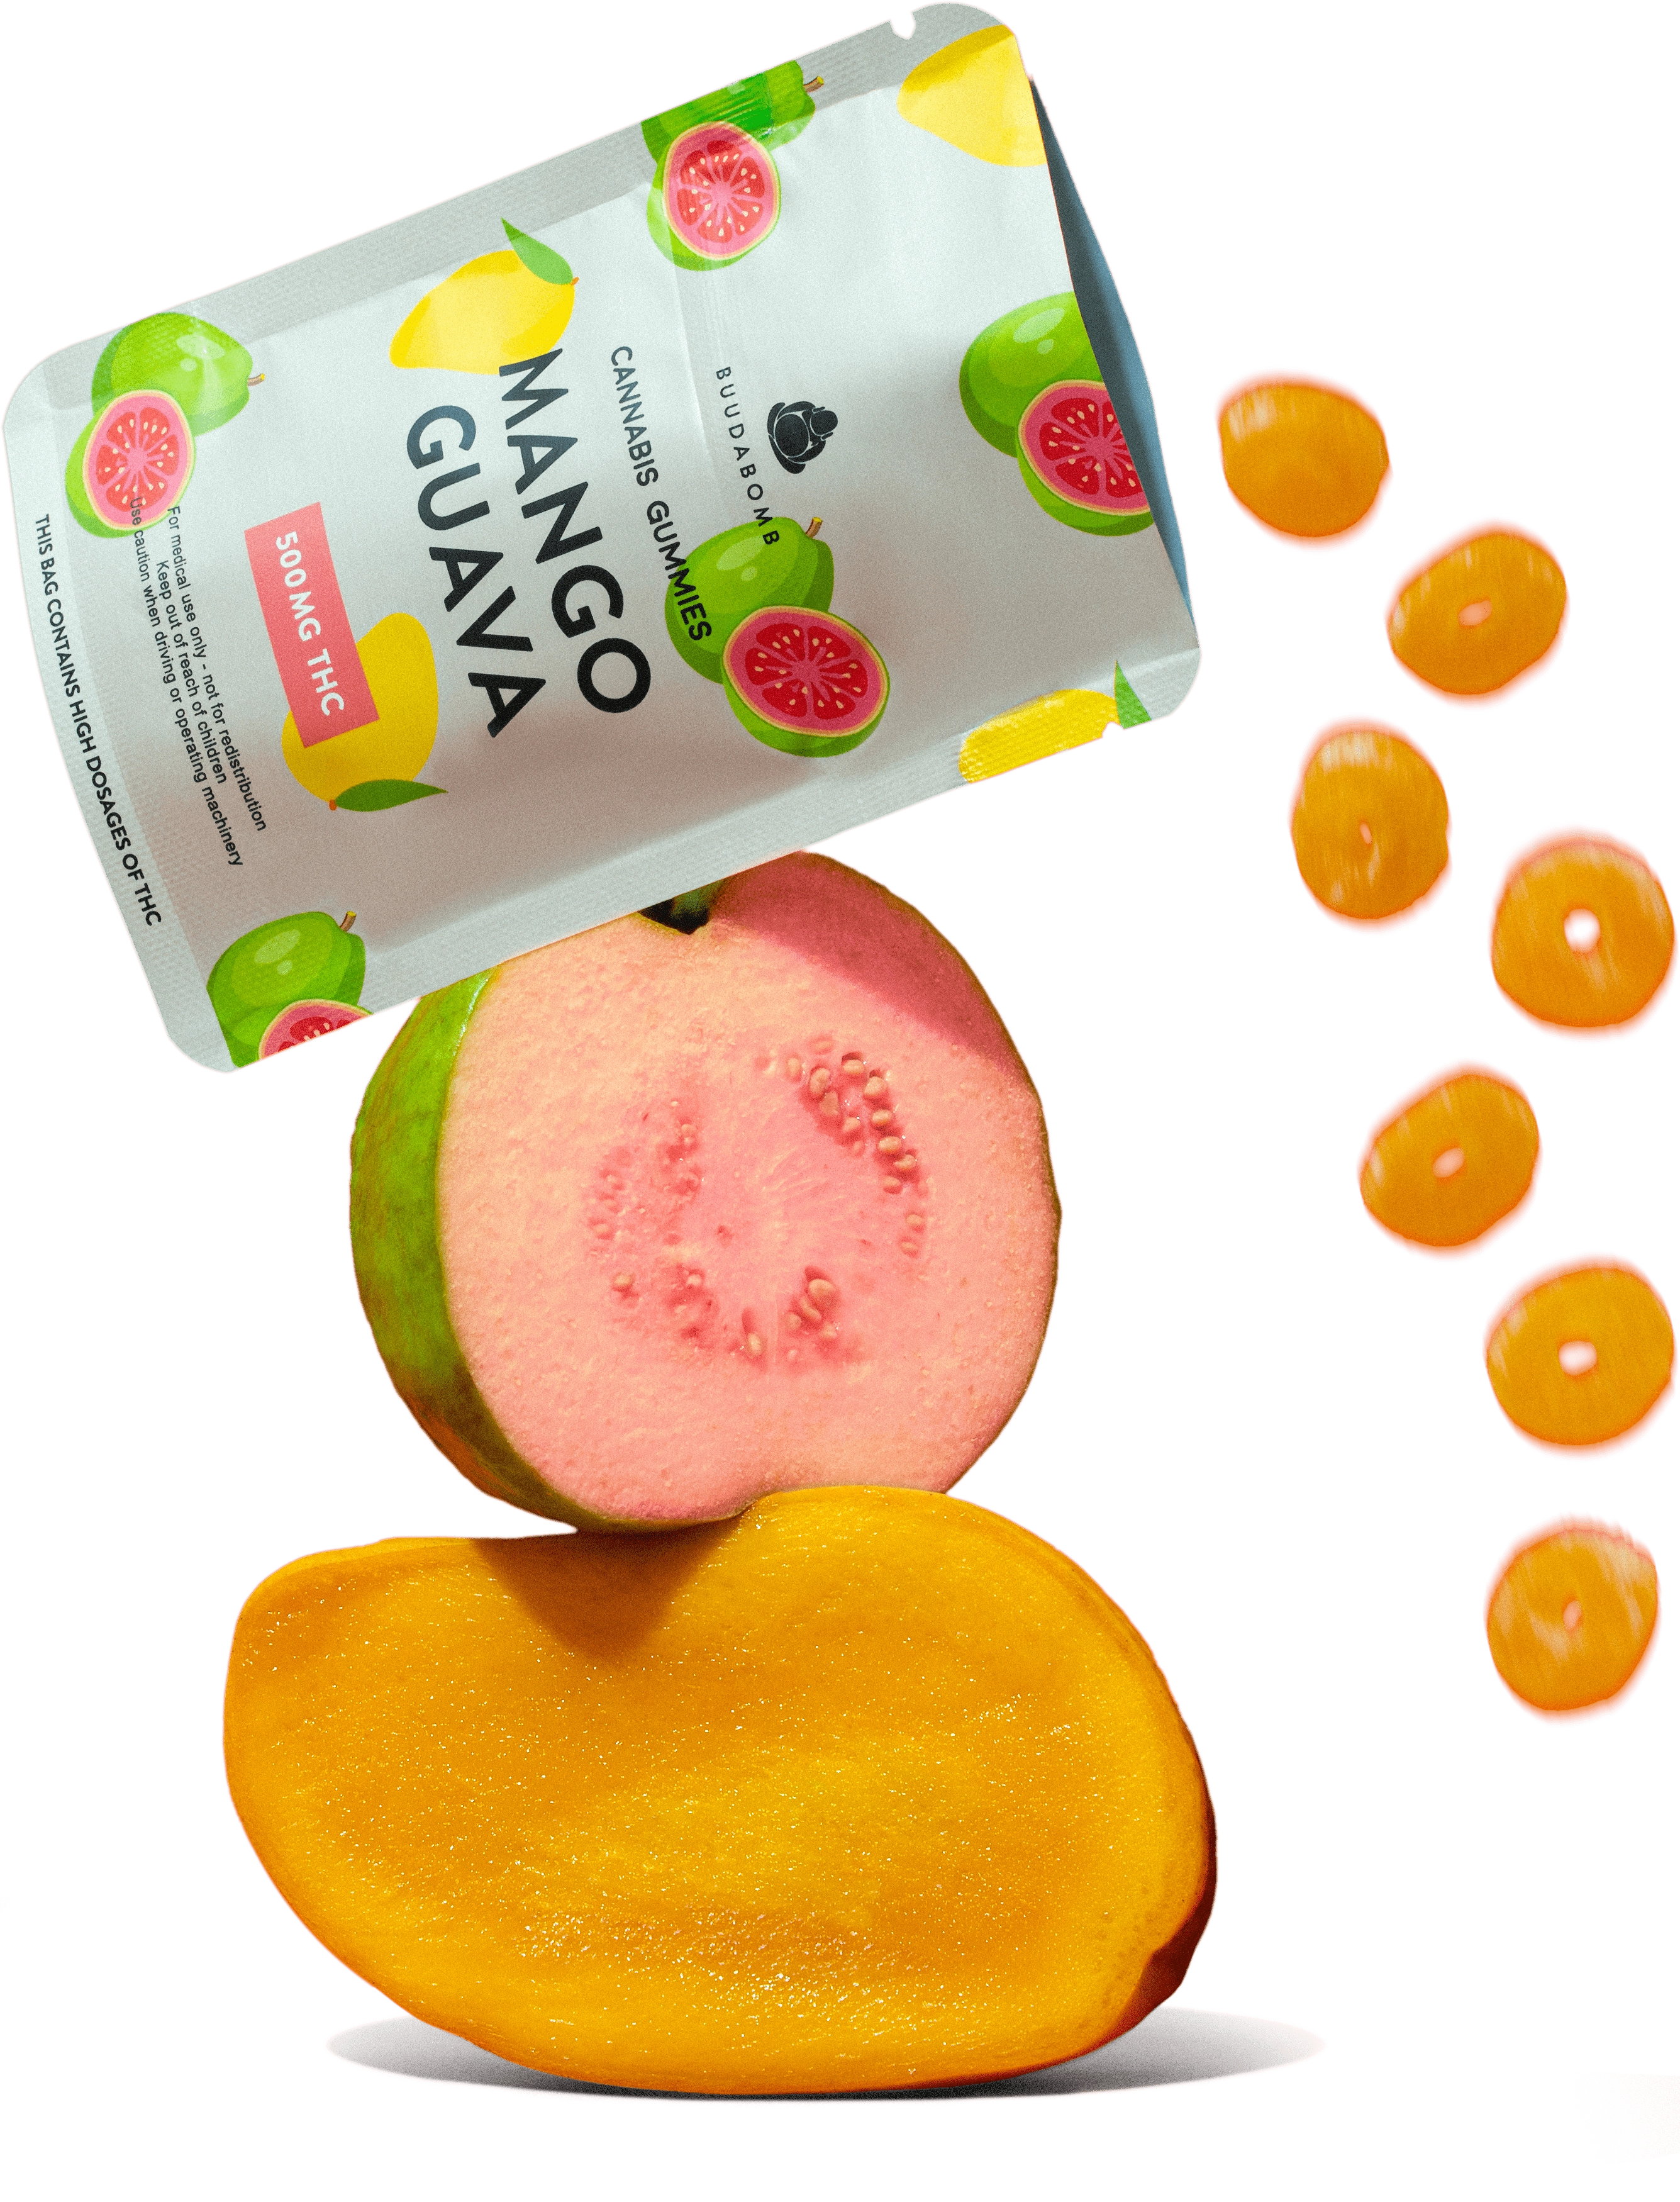 Buudabomb Mango Guava 500mg Available For Delivery - Chillin Cheetah